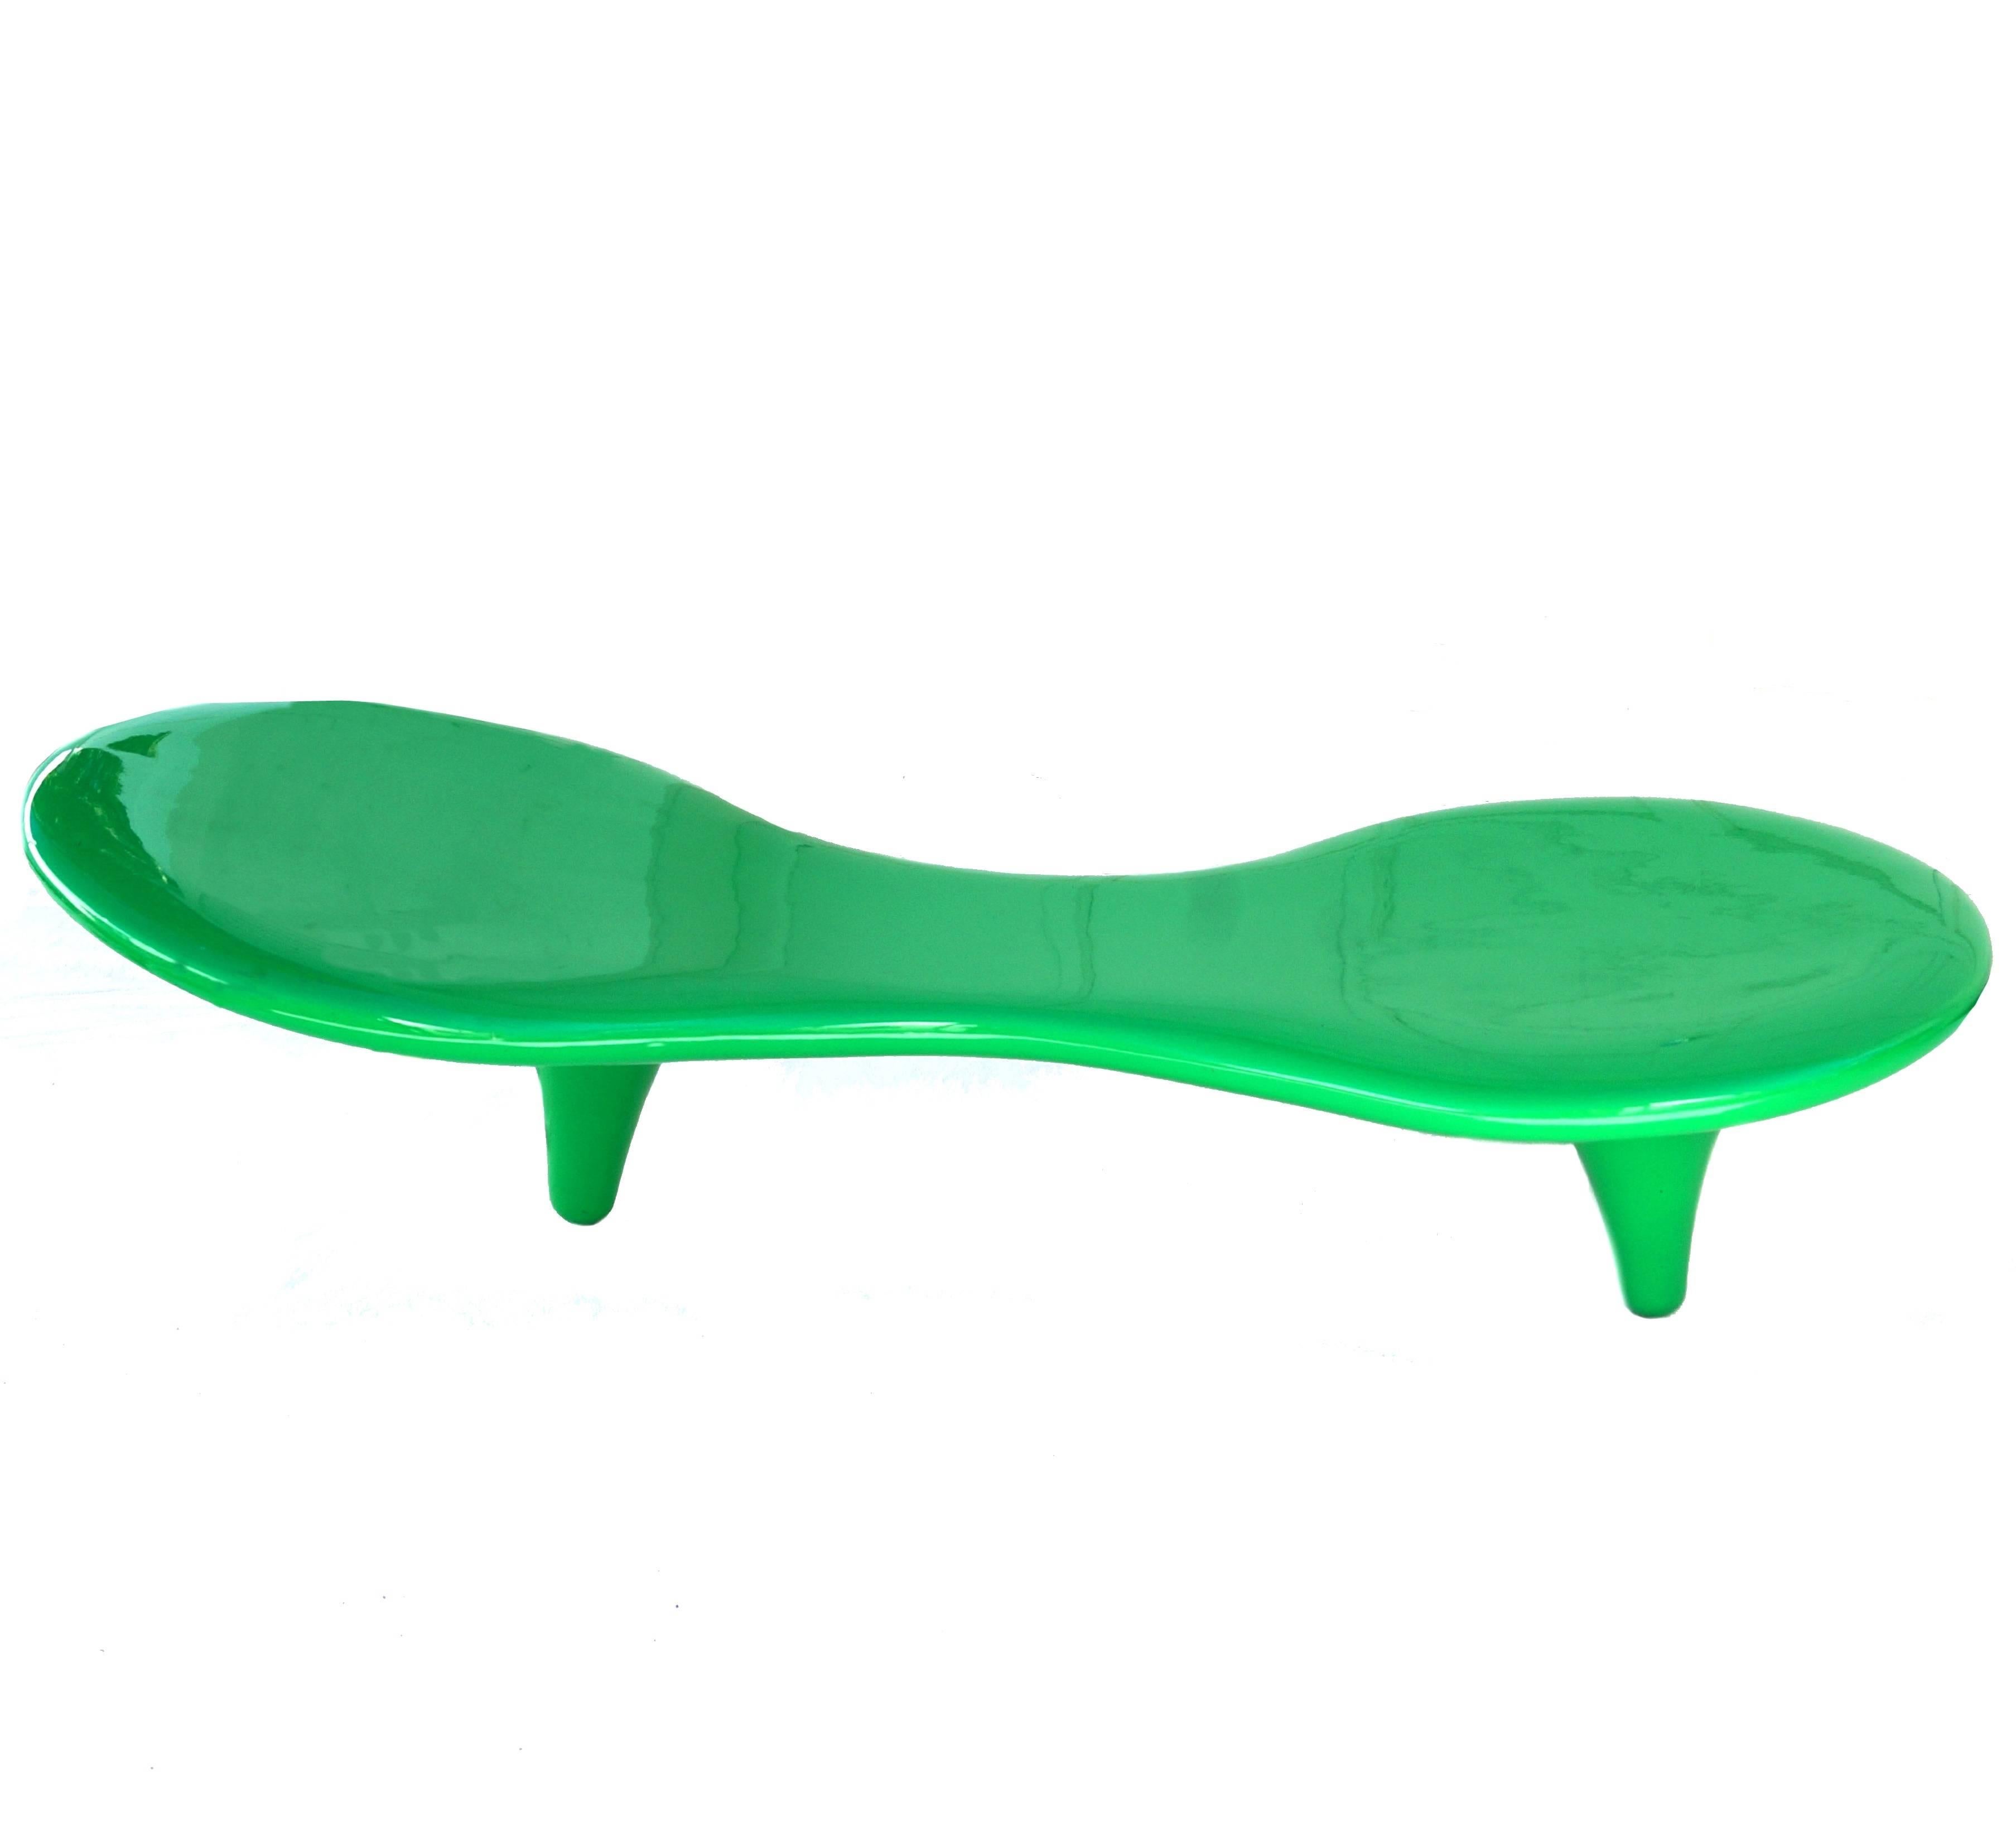 Marc Newson Orgone chaise longue bench for Cappellini.